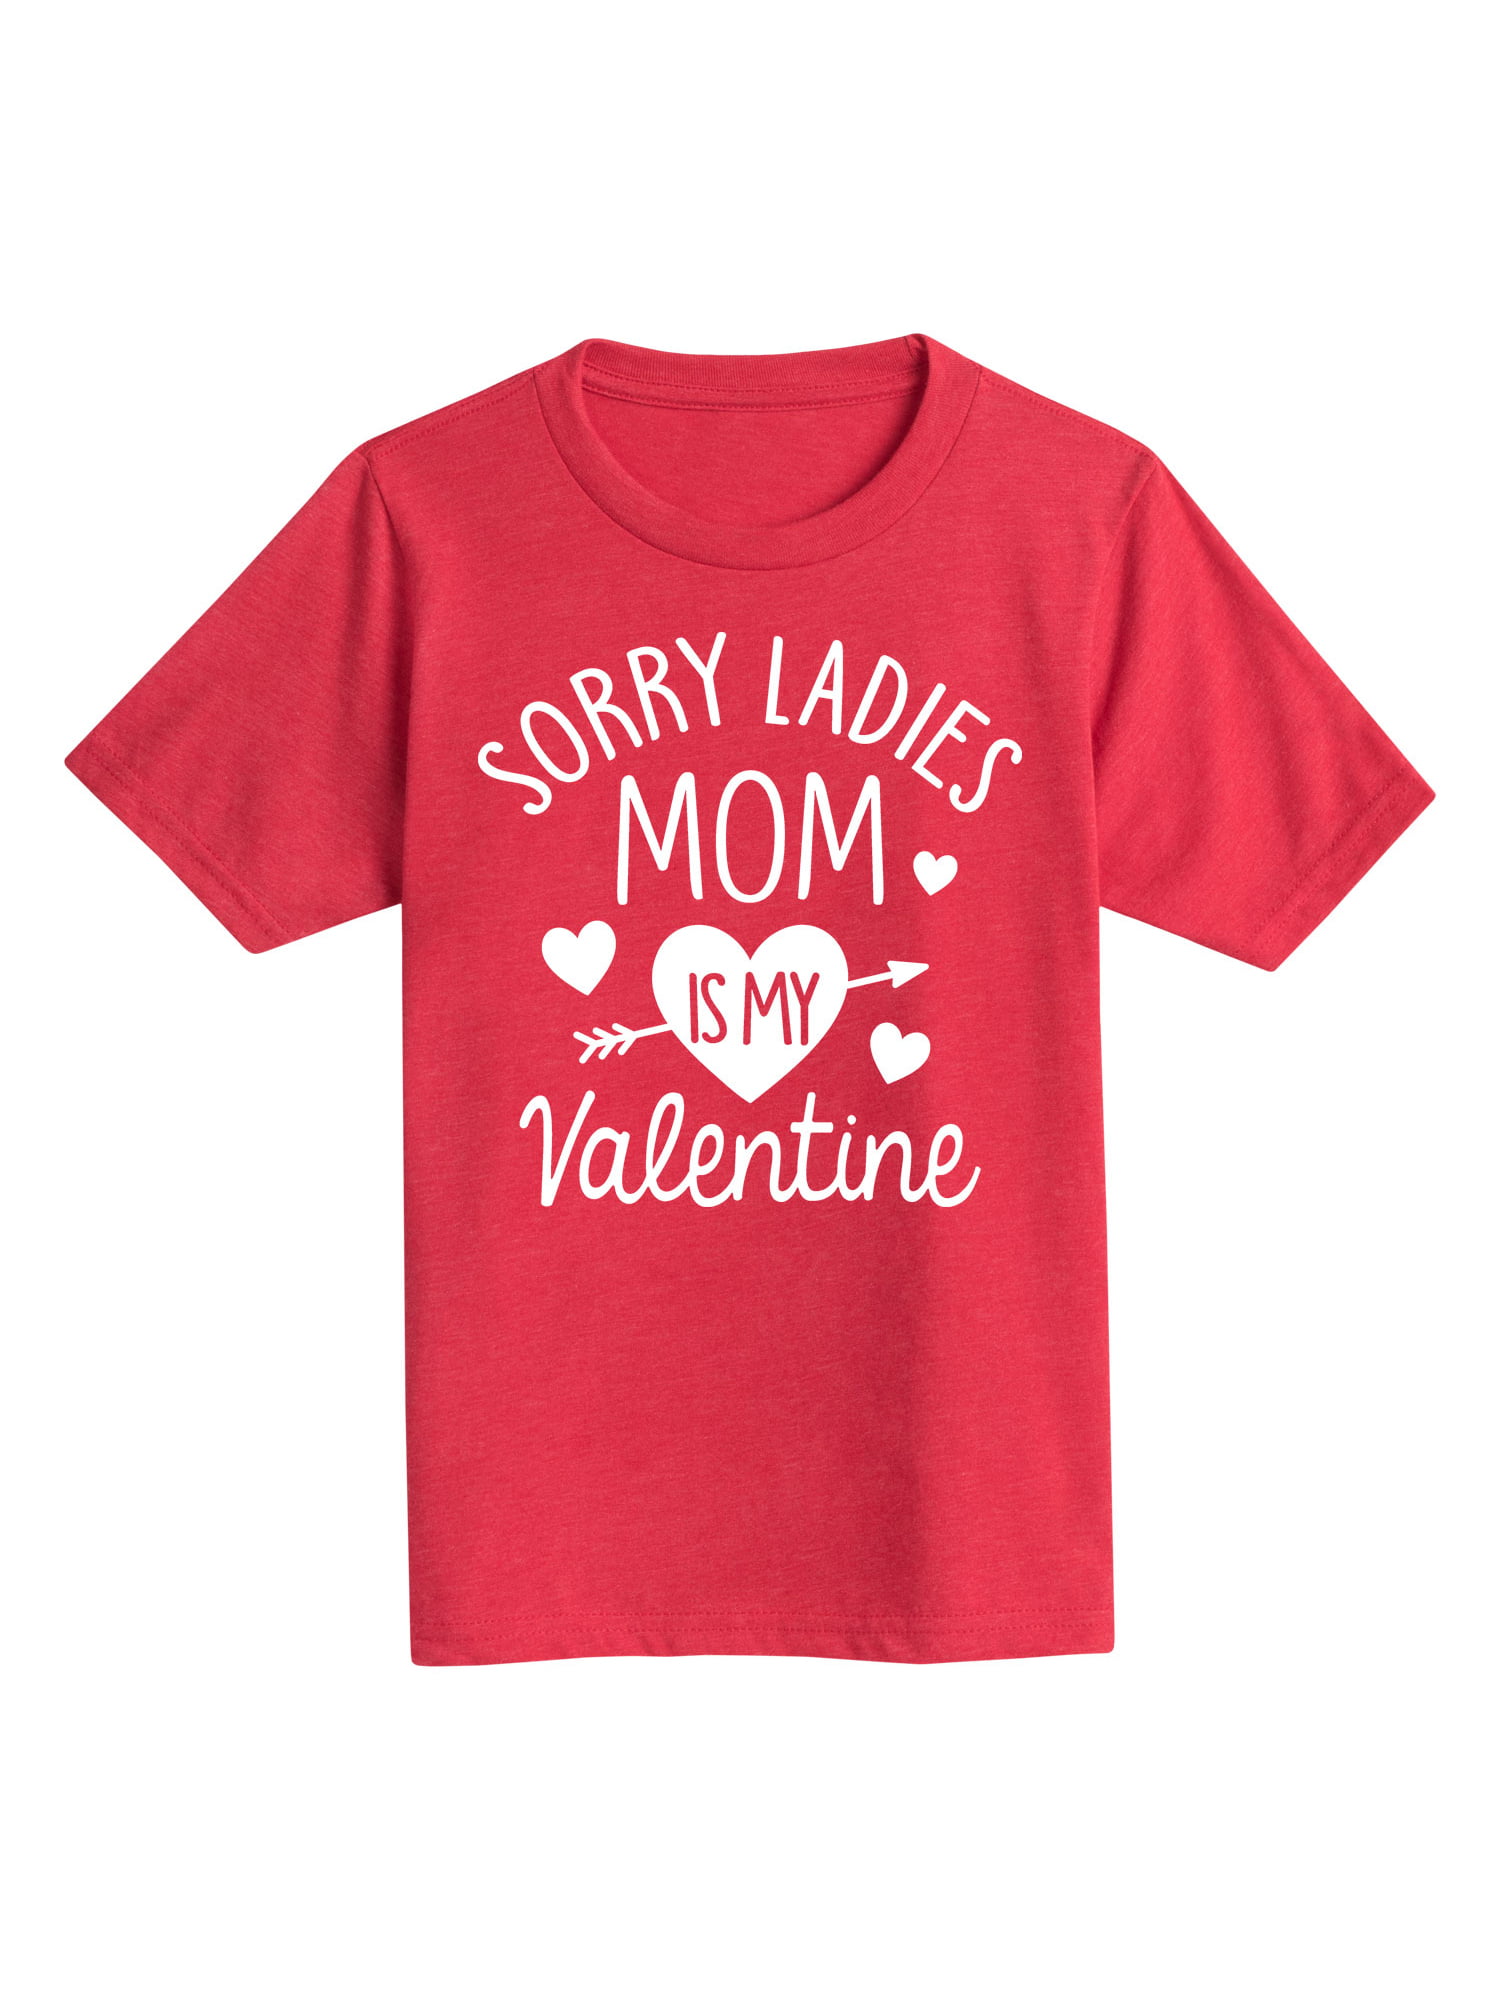 Boys Valentines Day Shirt Sorry Ladies My Mom Is My Valentine Red Shirt Black White Toddler Cute Funny 